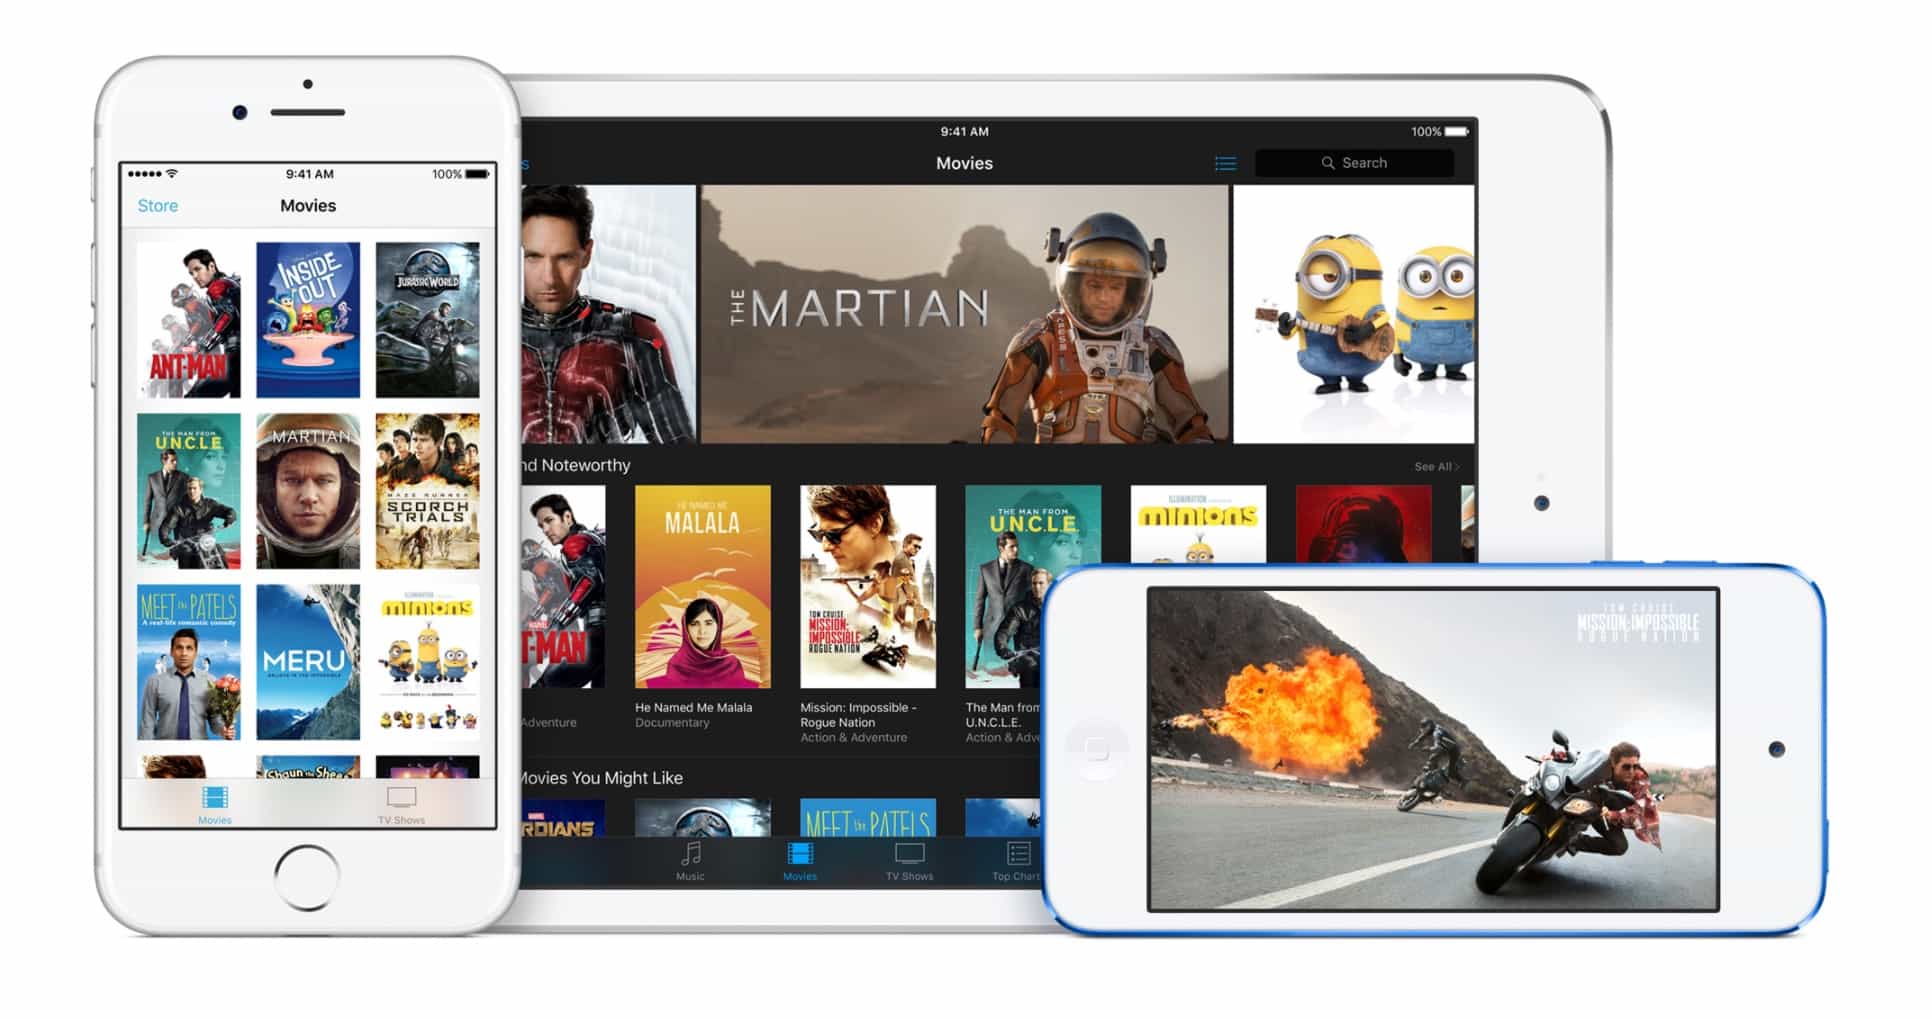 iTunes 12.6 makes it easy to watch rented movies on any device.